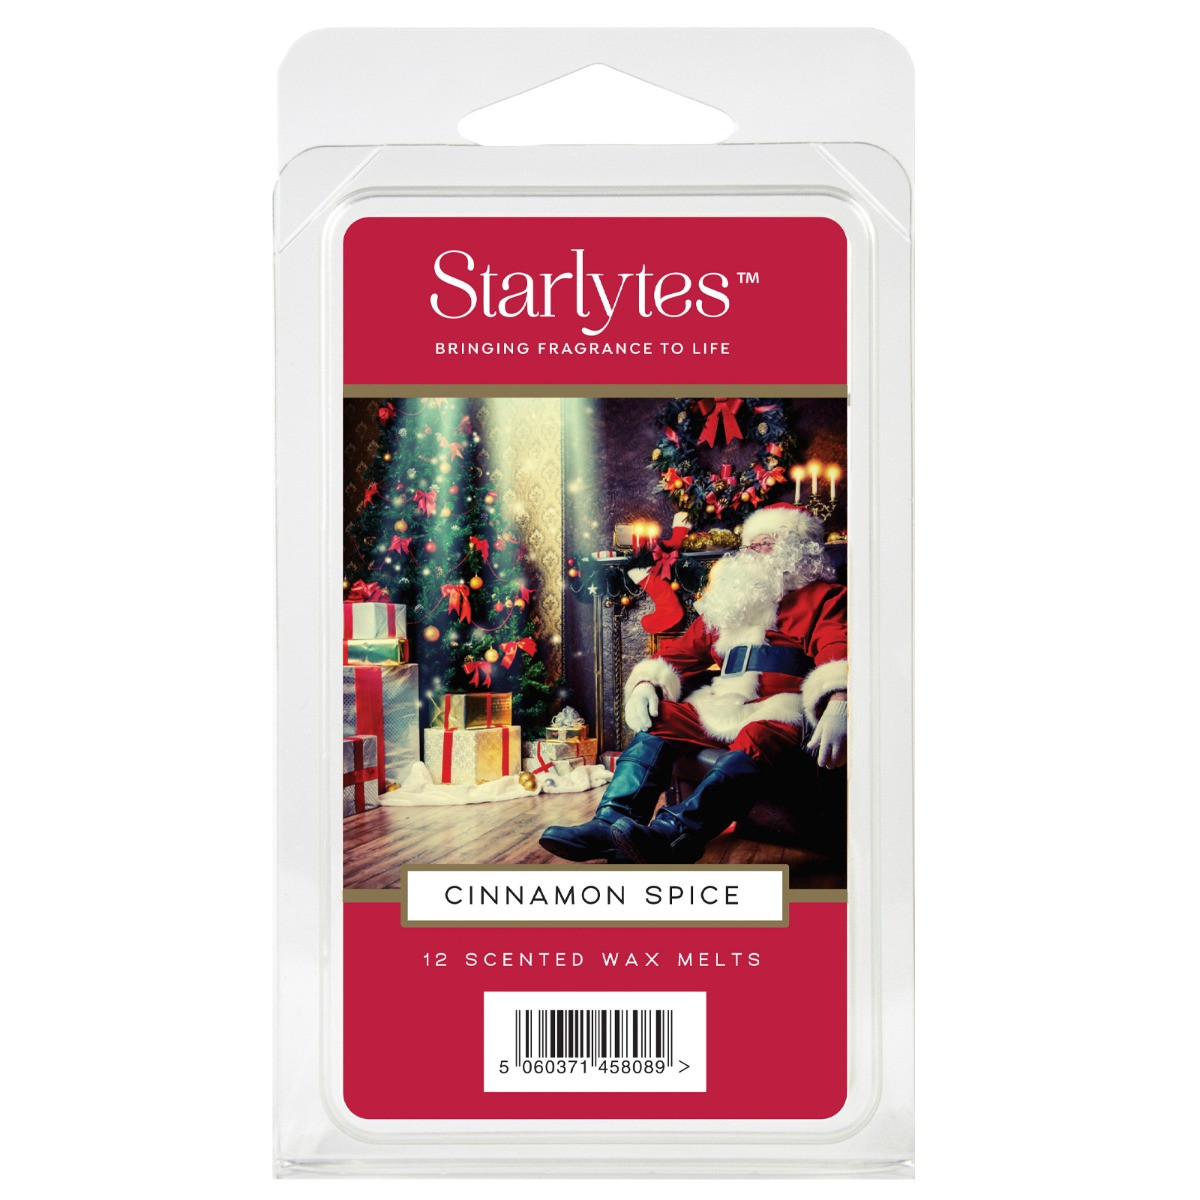 Starlytes Wax Melts 12 Pack - Cinnamon Spice>